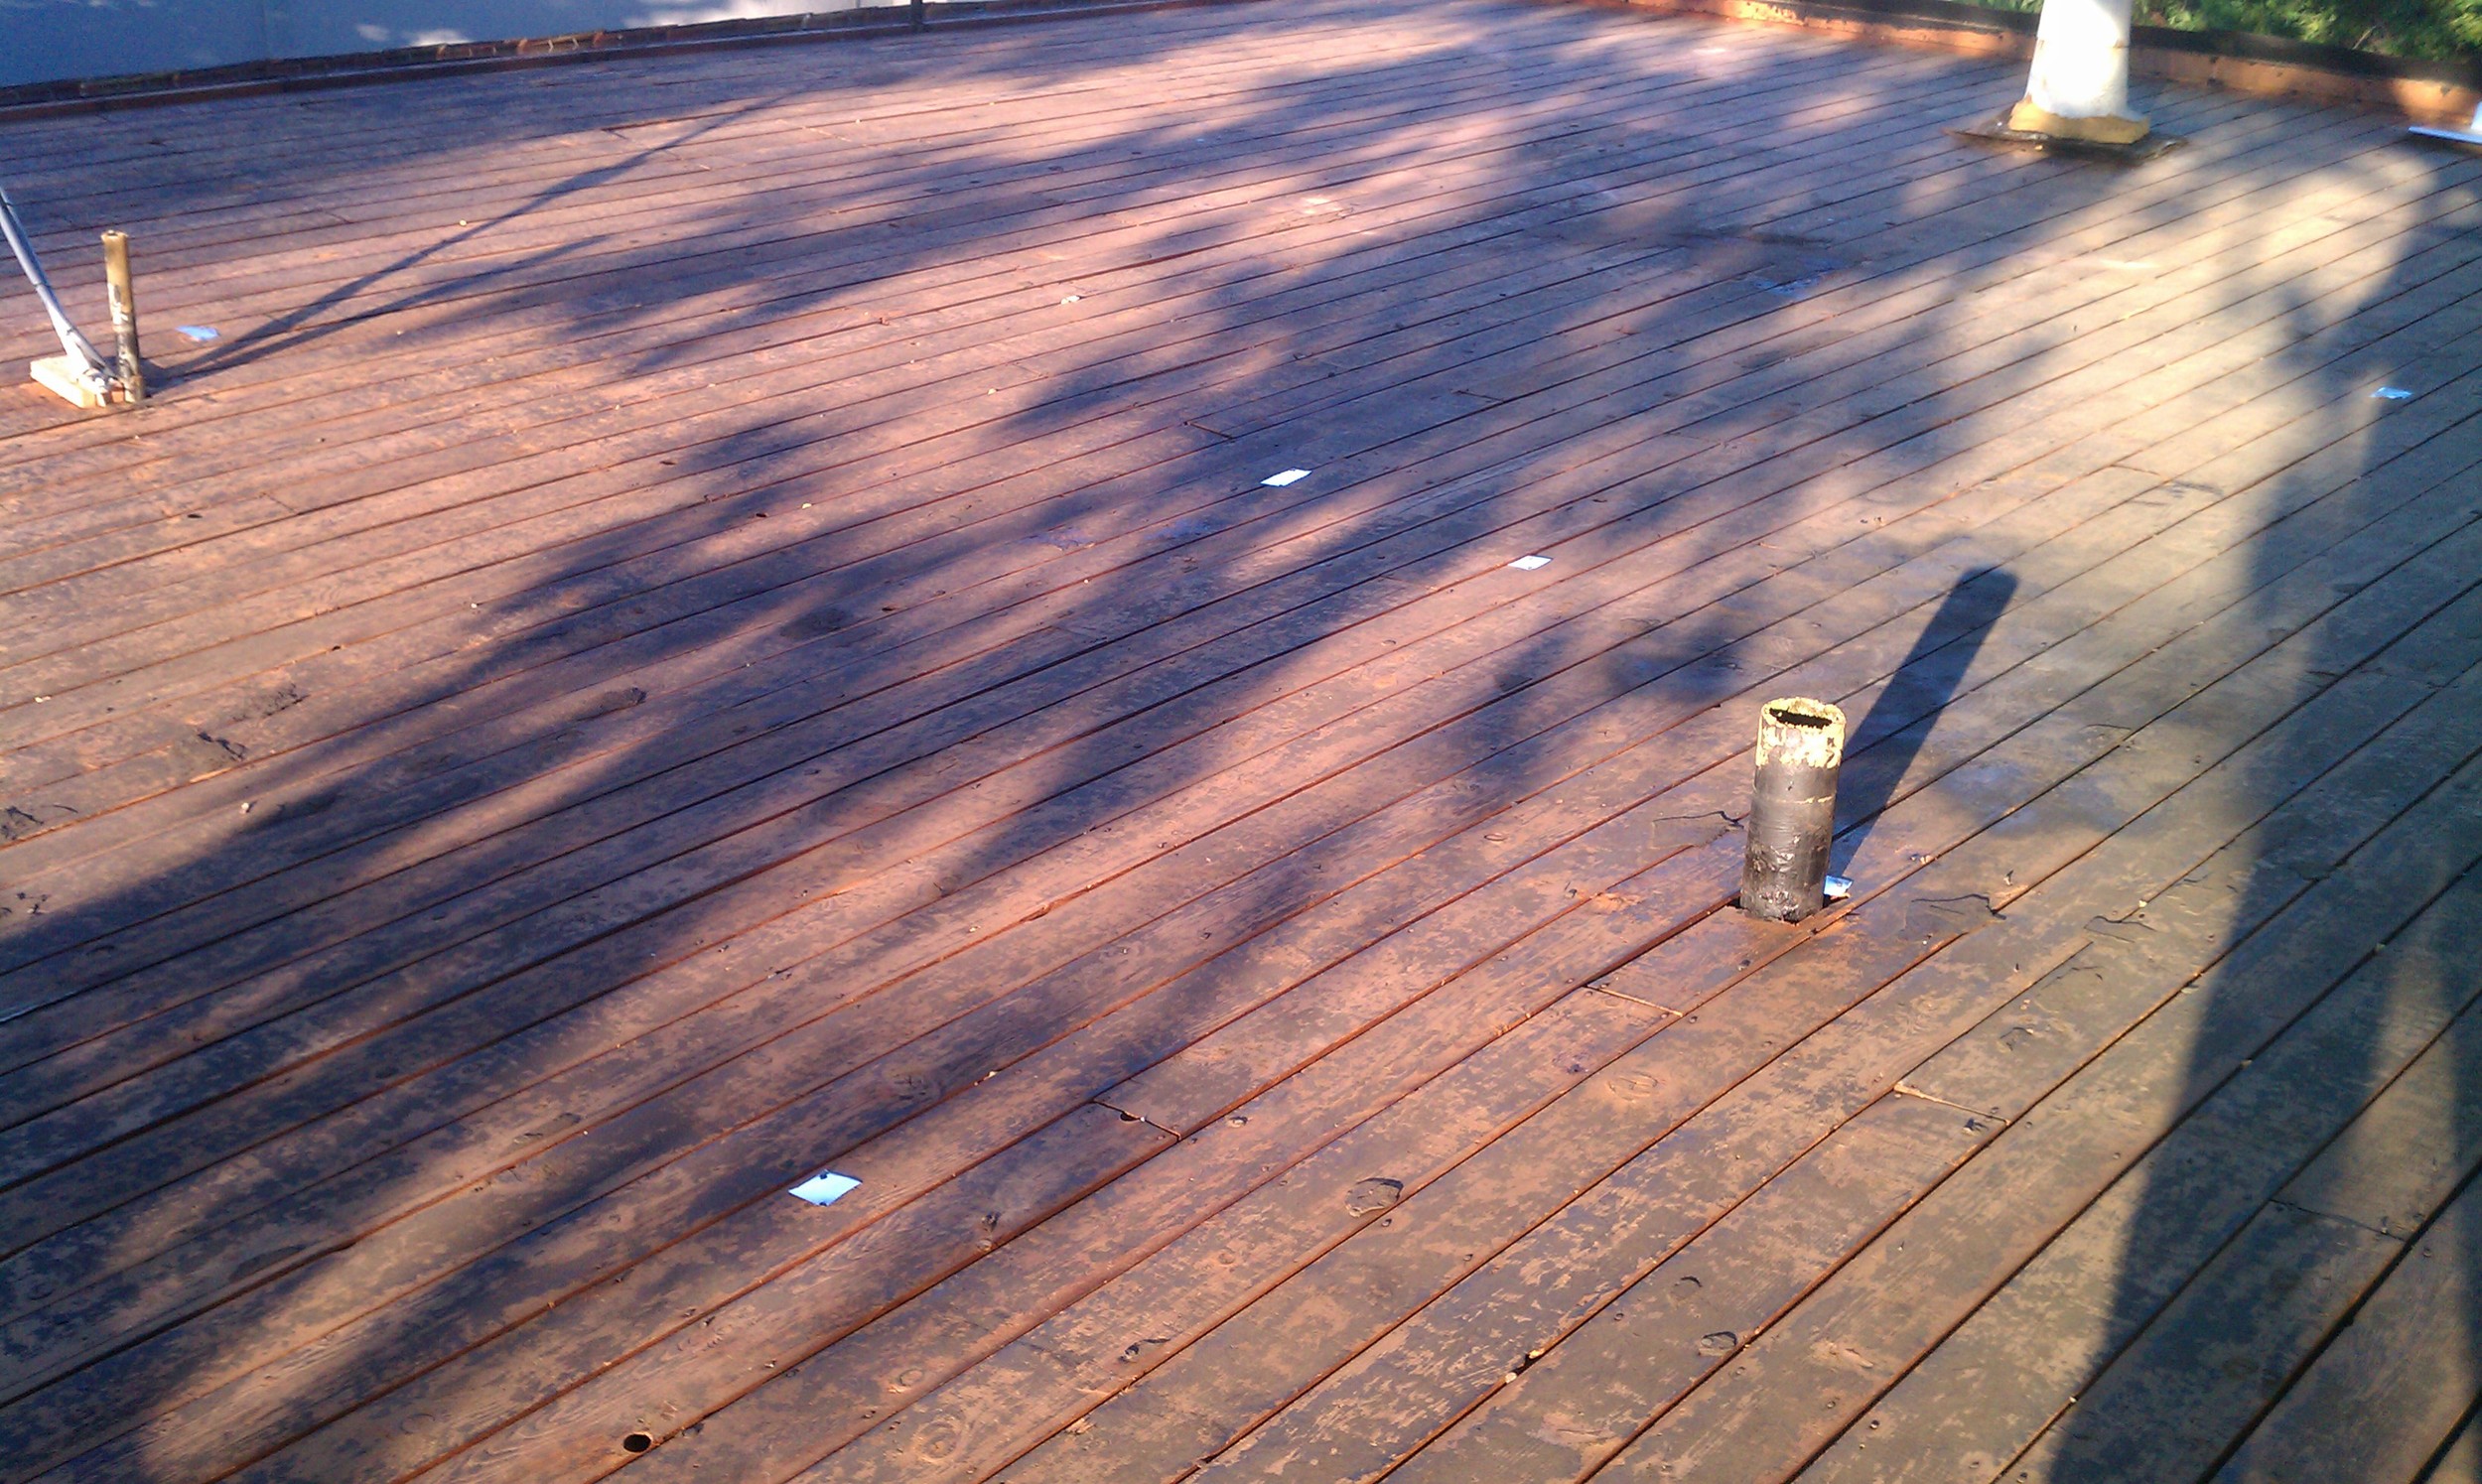 Roof tear off project by Ved's Roofing of Yuba City, CA.